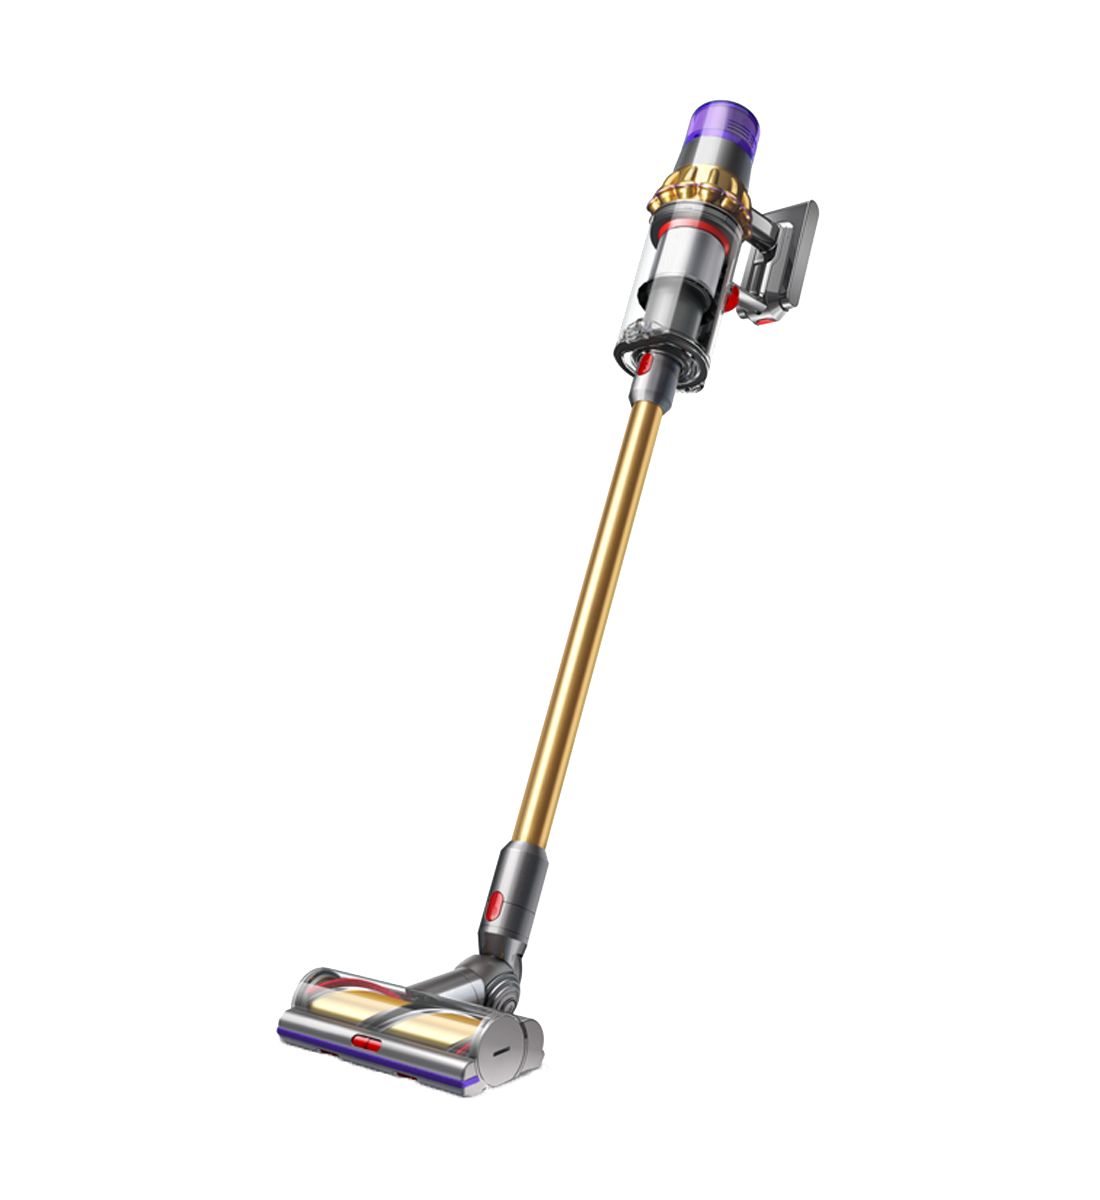 Dyson V11 Absolute+ (Gold)